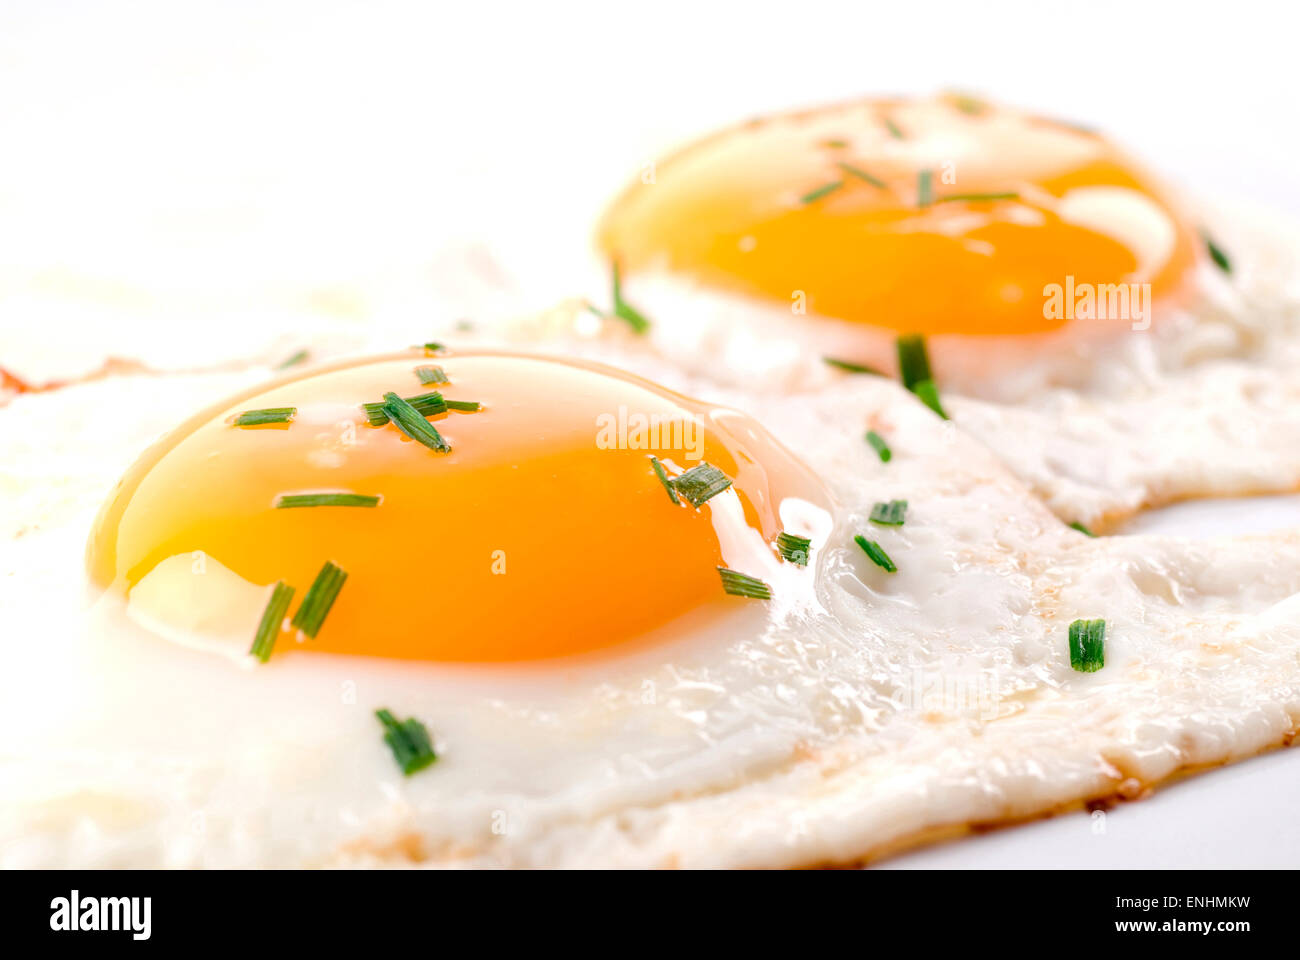 Two fried eggs with chive on top. Stock Photo